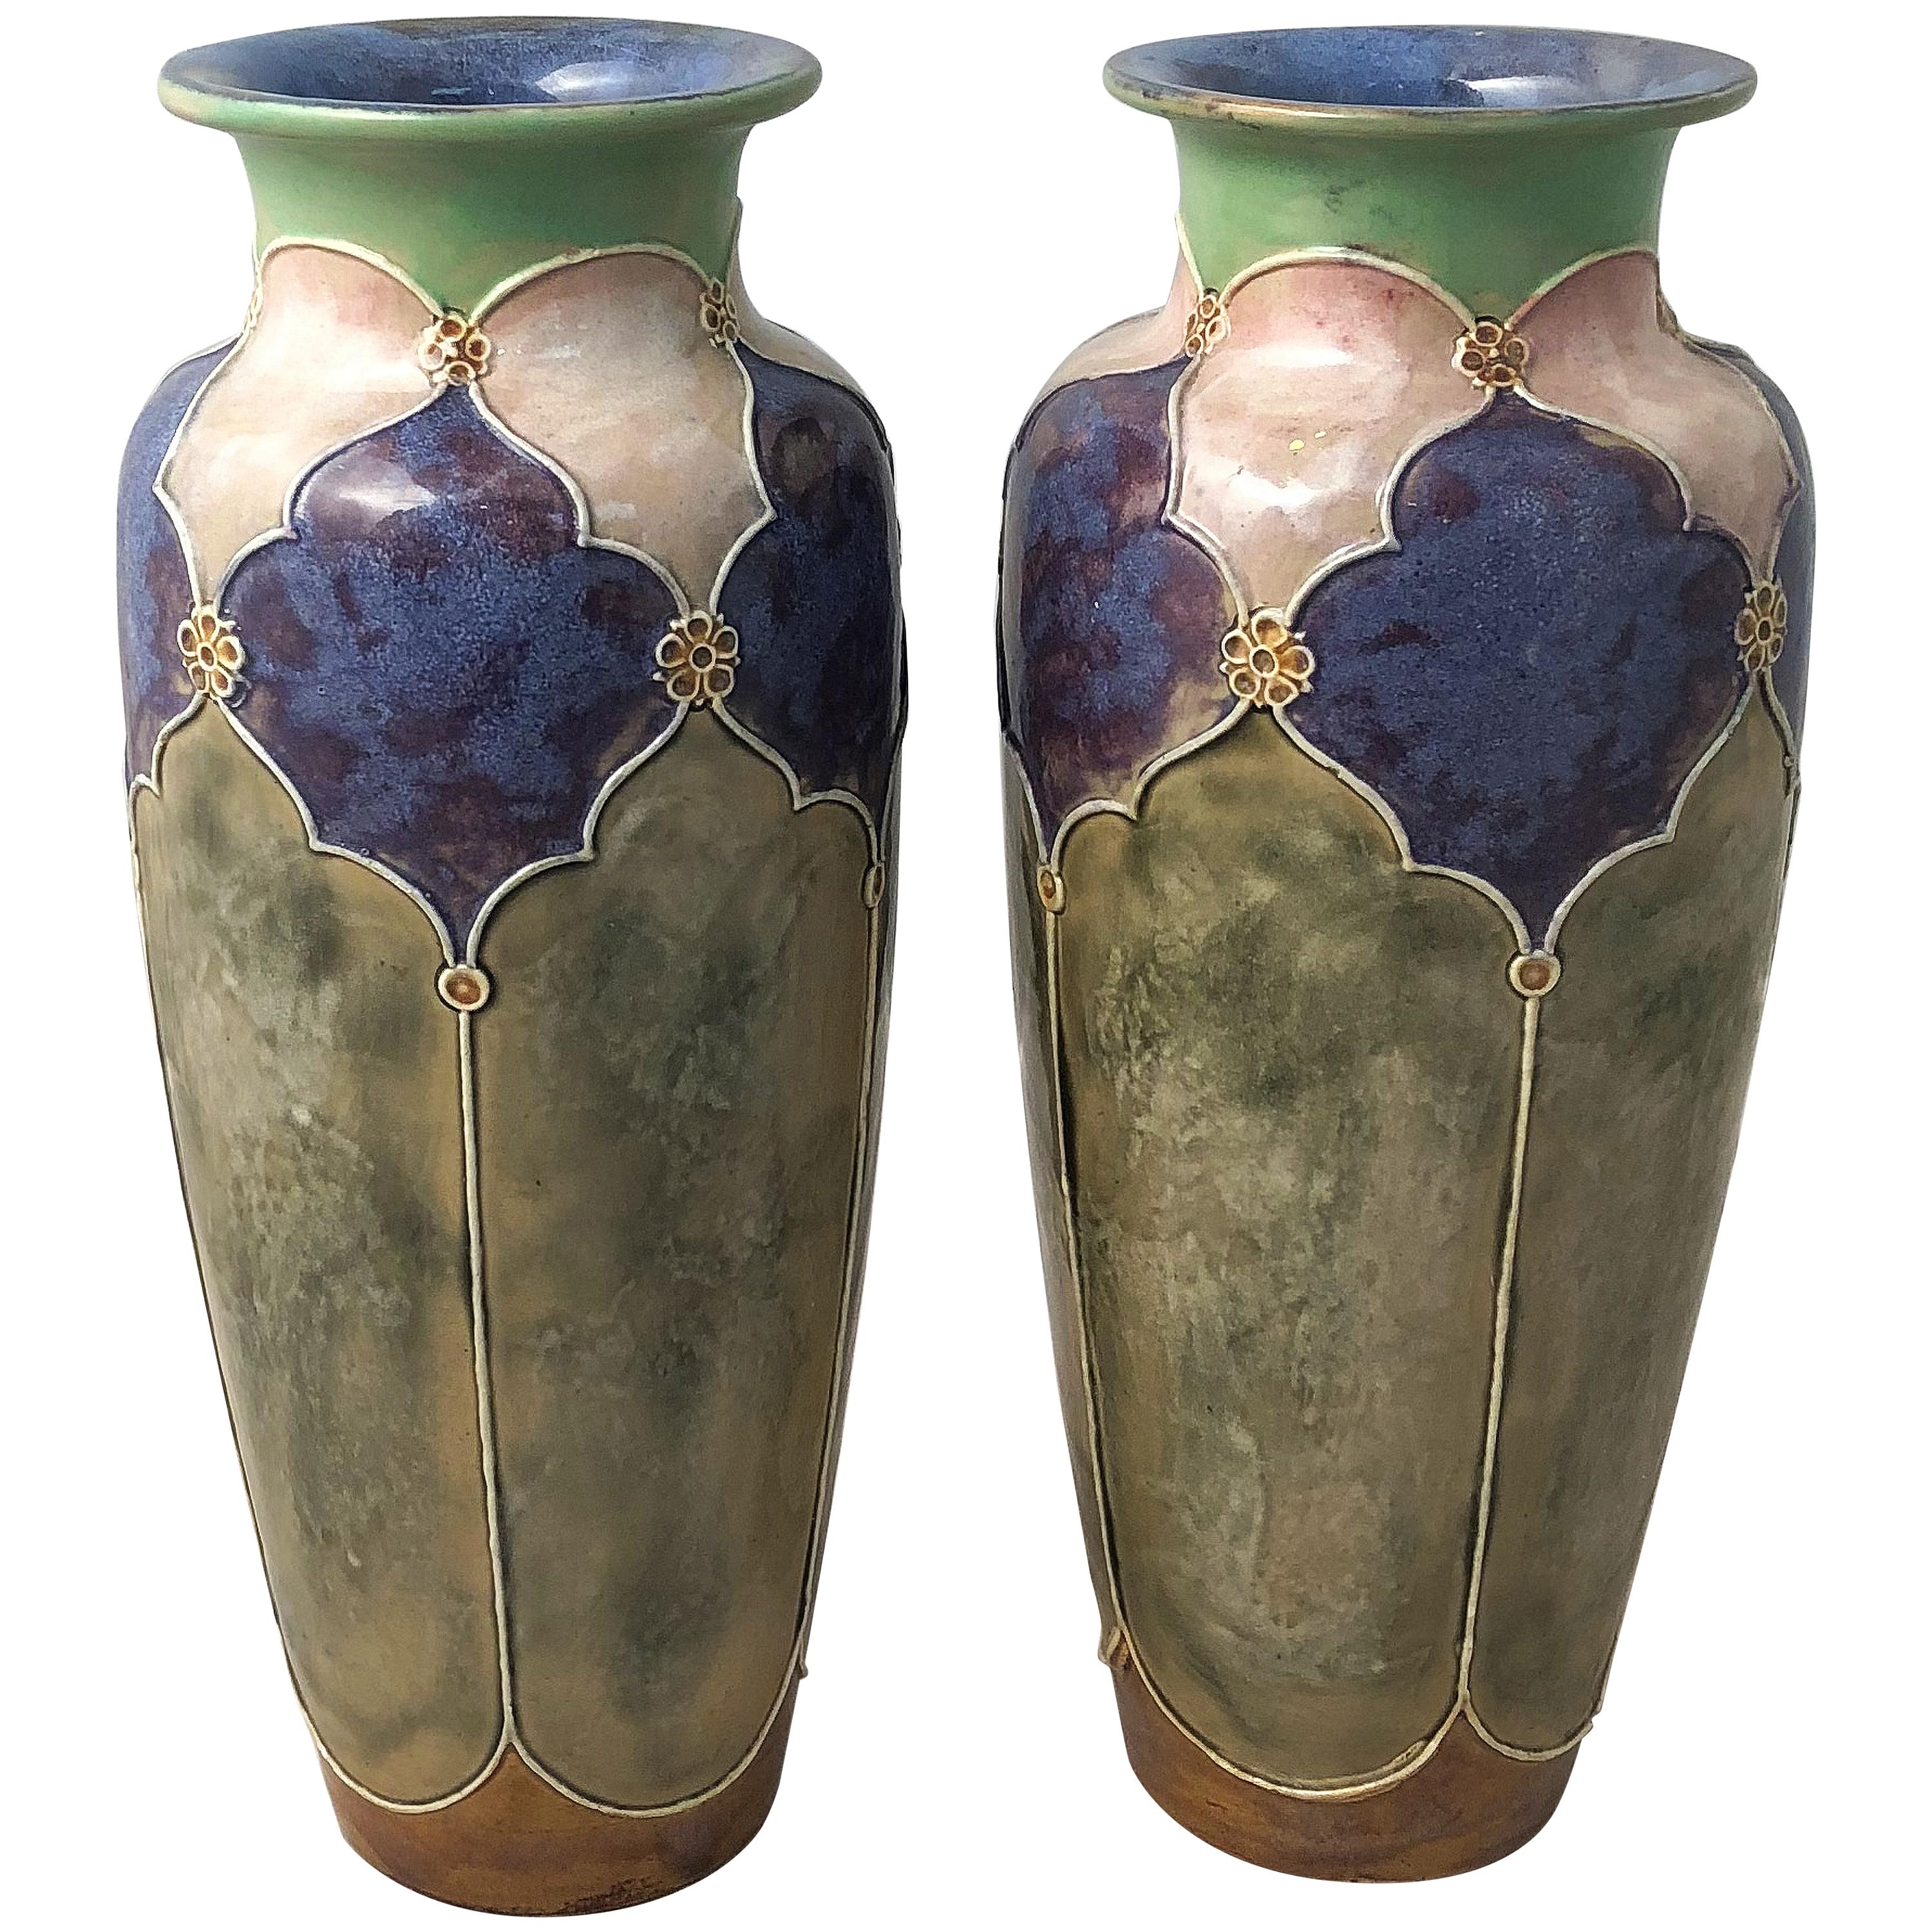 Arts and Crafts Period Vases by Royal Doulton 'Priced as a Pair'